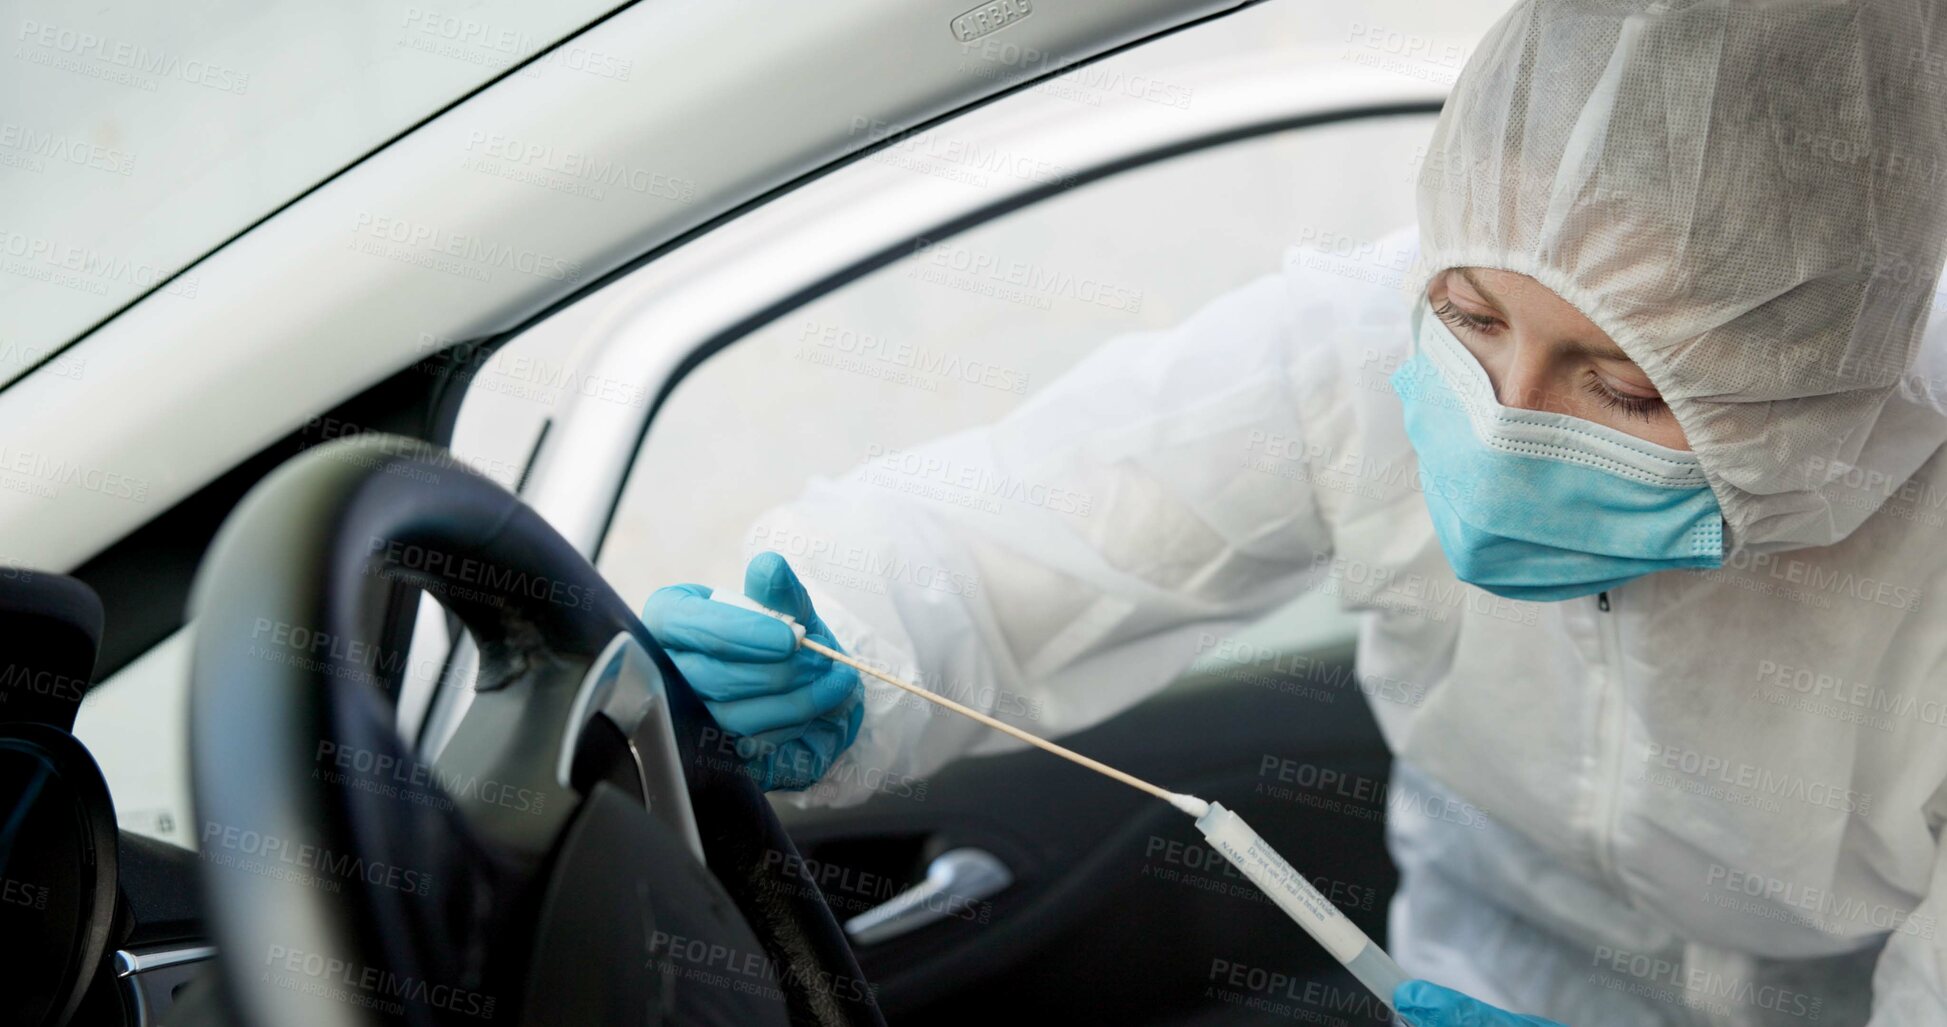 Buy stock photo Science, csi and swab for dna evidence in crime scene car for investigation of accident and burglary with hazmat.
Forensic, research analysis and person with sample collection for medical observation